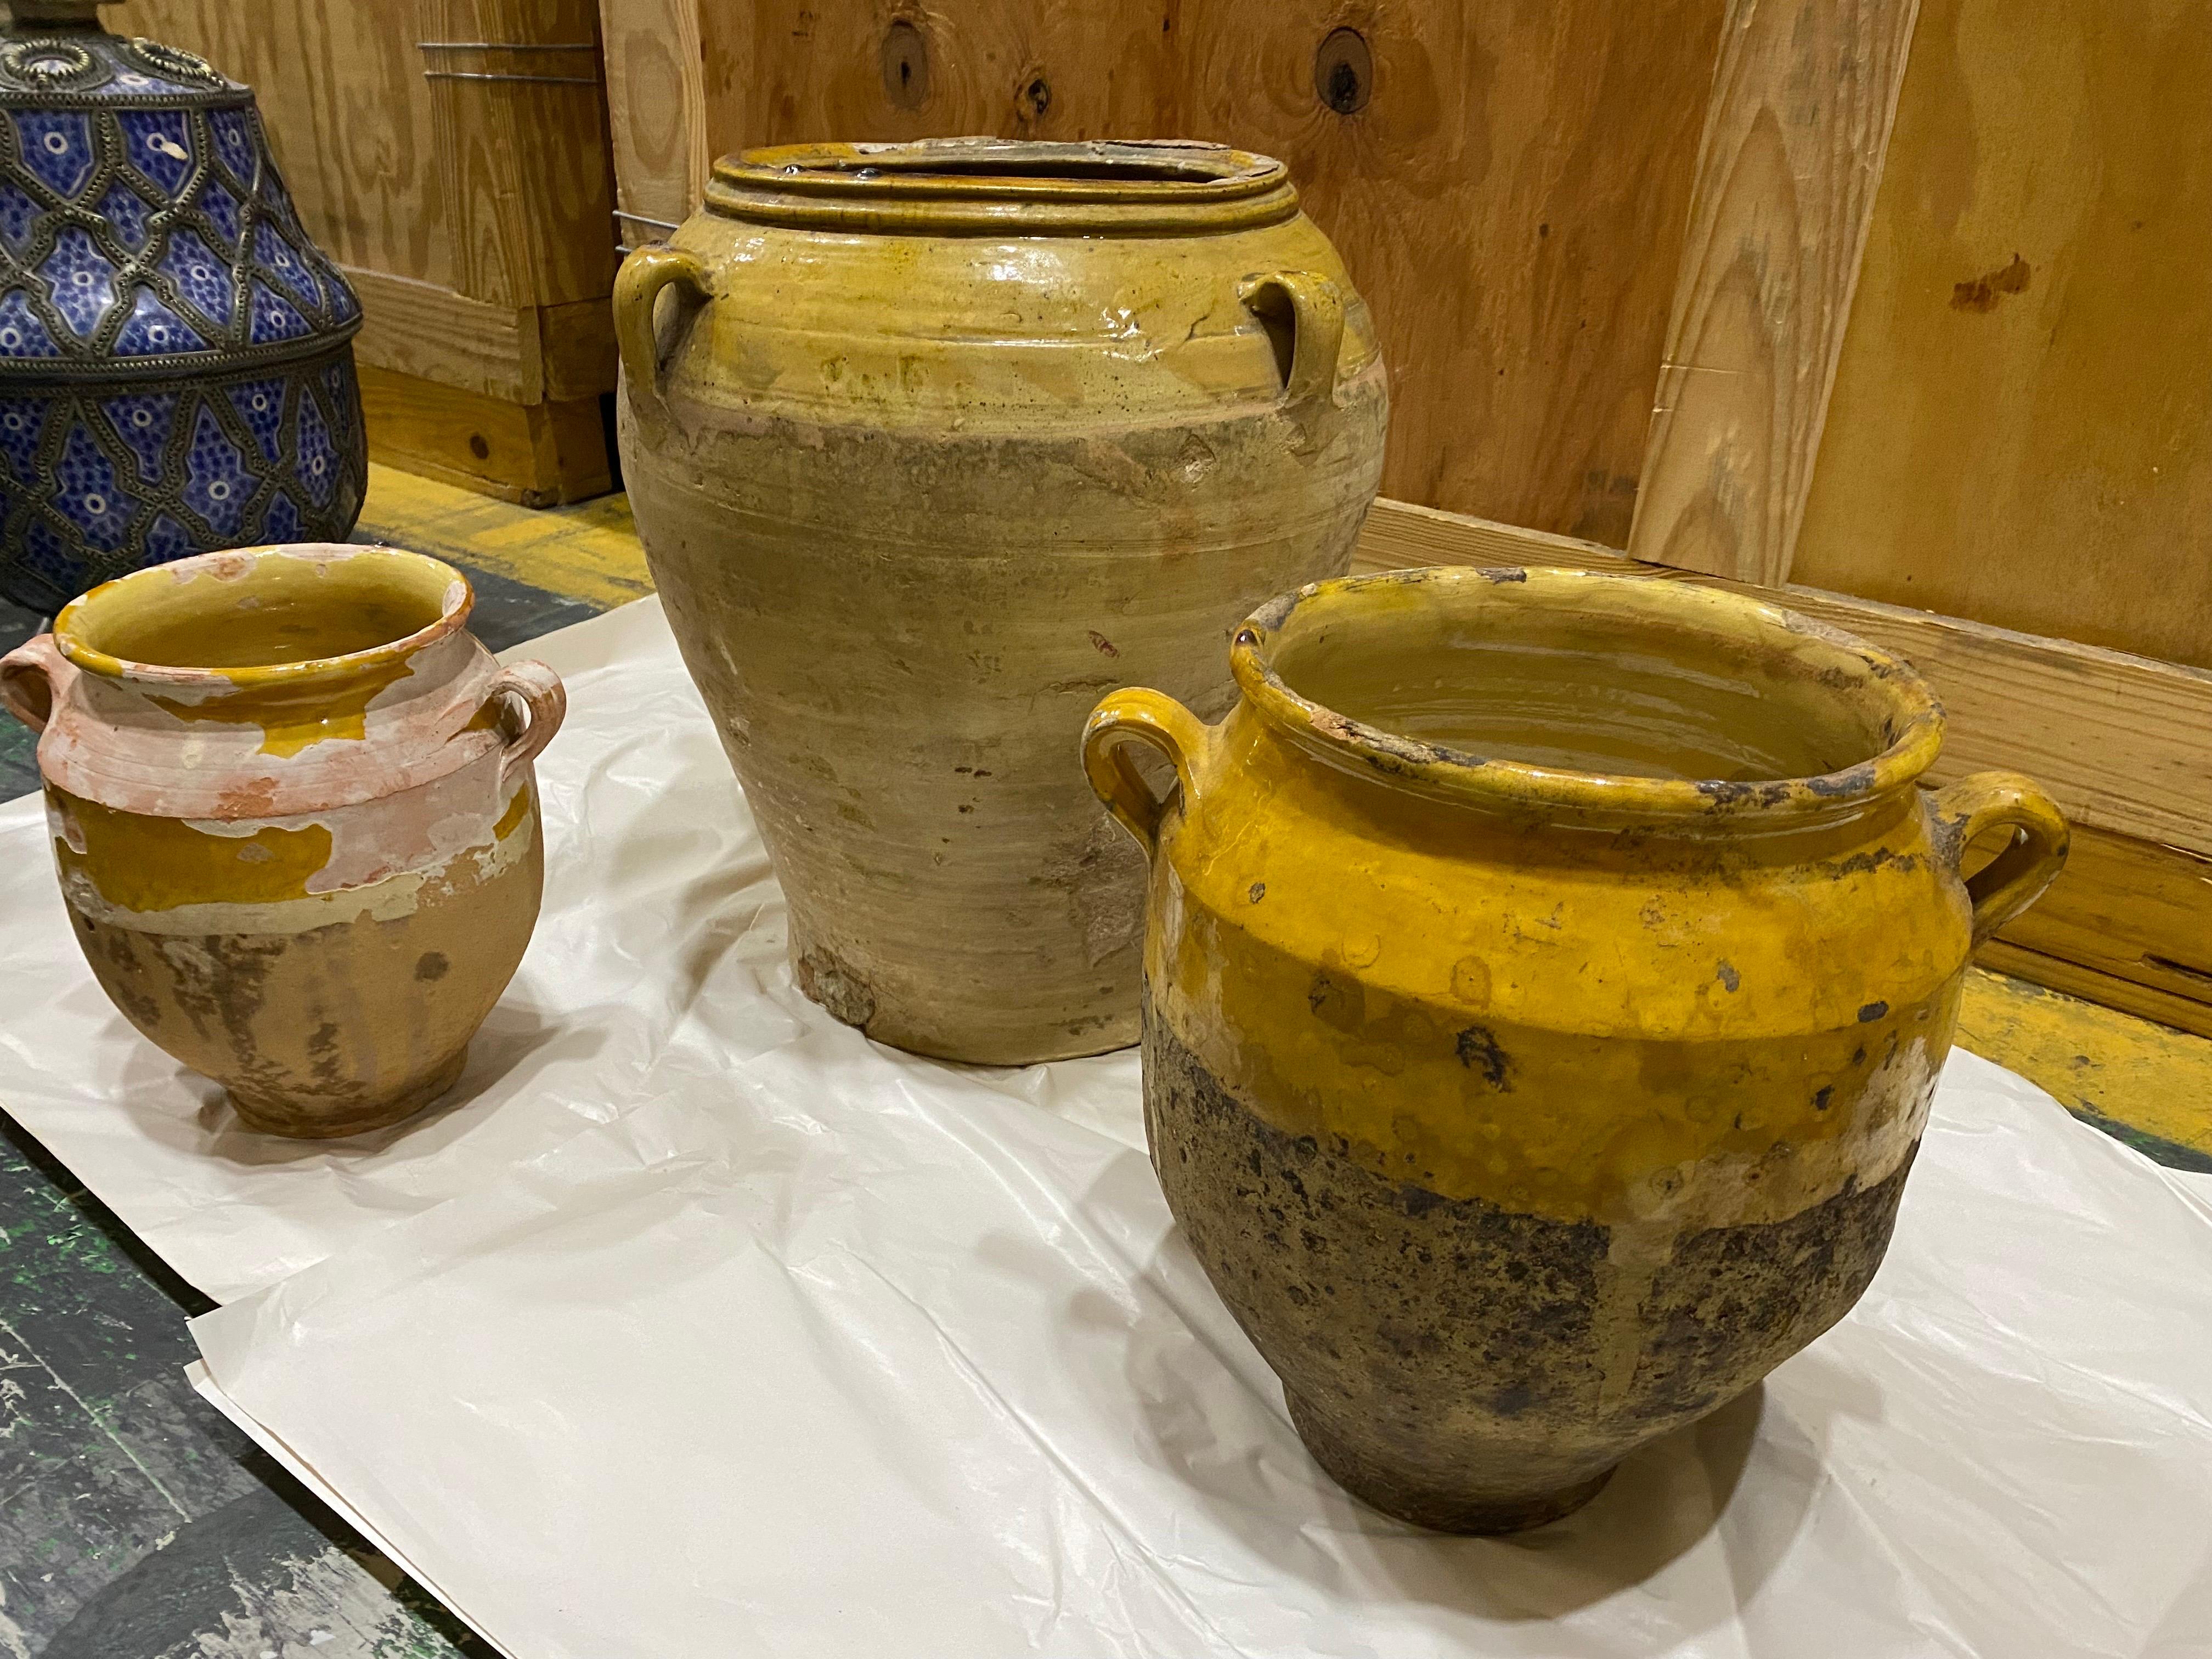 Set of Three Late 19th C. French Provinical Terracotta Yellow Confit Pots
Three sizes of traditional earthenware pottery confit pots from South West France with yellow glaze. Lovely decorative pieces which look good as a group.

Largest with four